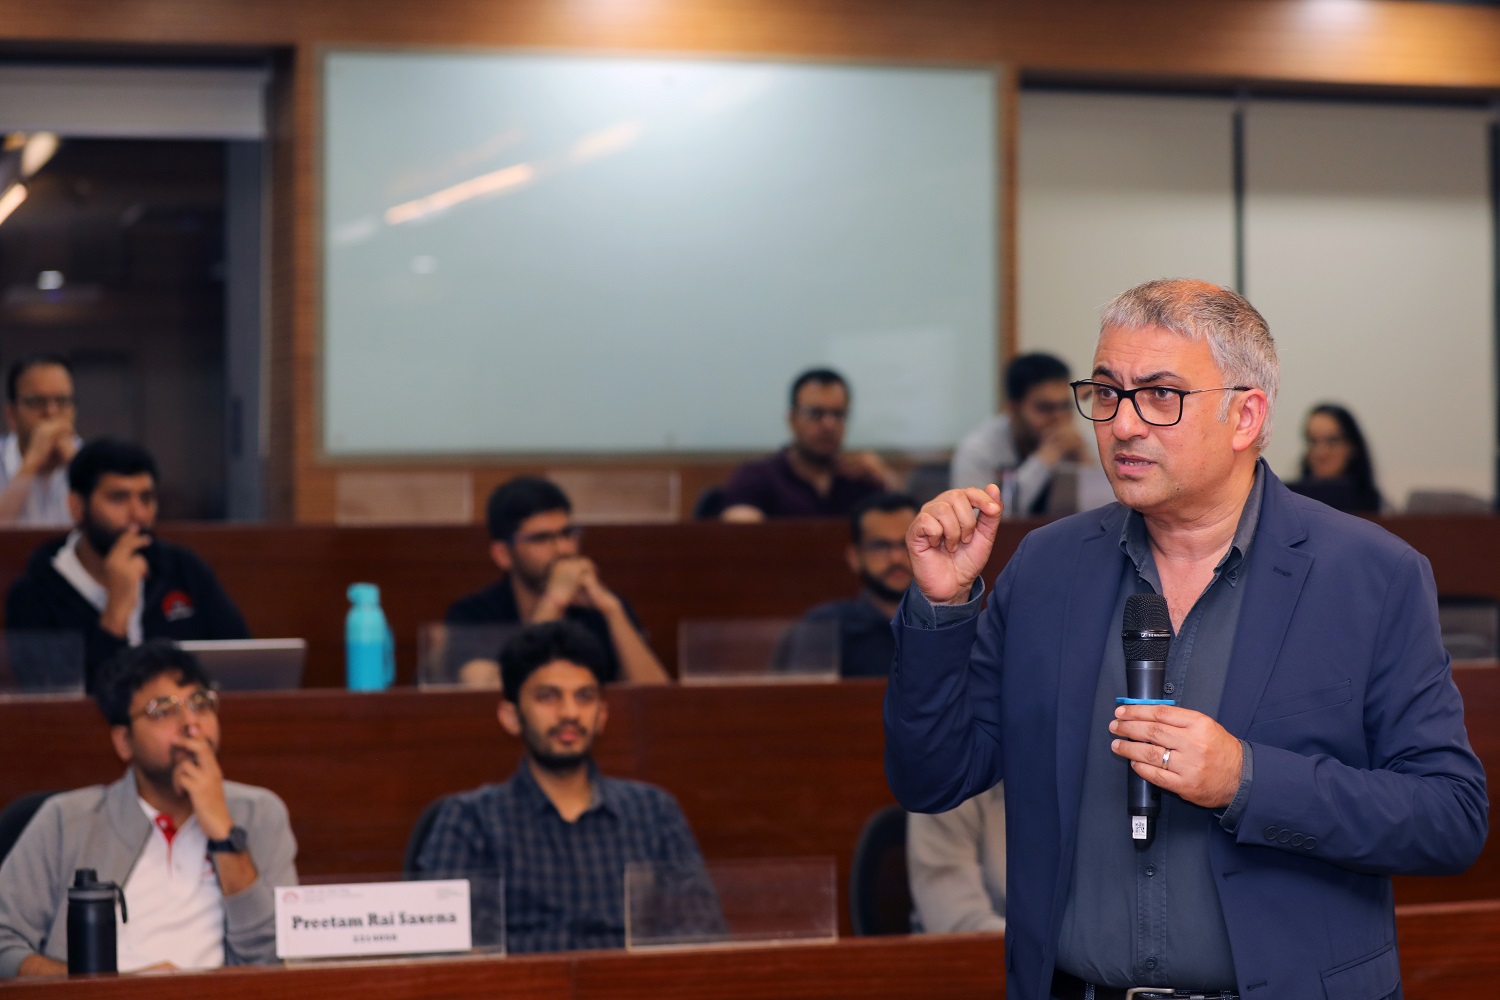 Mr Vikram Mehra, Managing Director, Saregama India Limited, delivered a talk on “Innovation: Taking Carvaan as an example,” as part of the seminar series organized by students of the Executive Post Graduate Programme in Management (EPGP), at IIMB, on 6th October 2023.